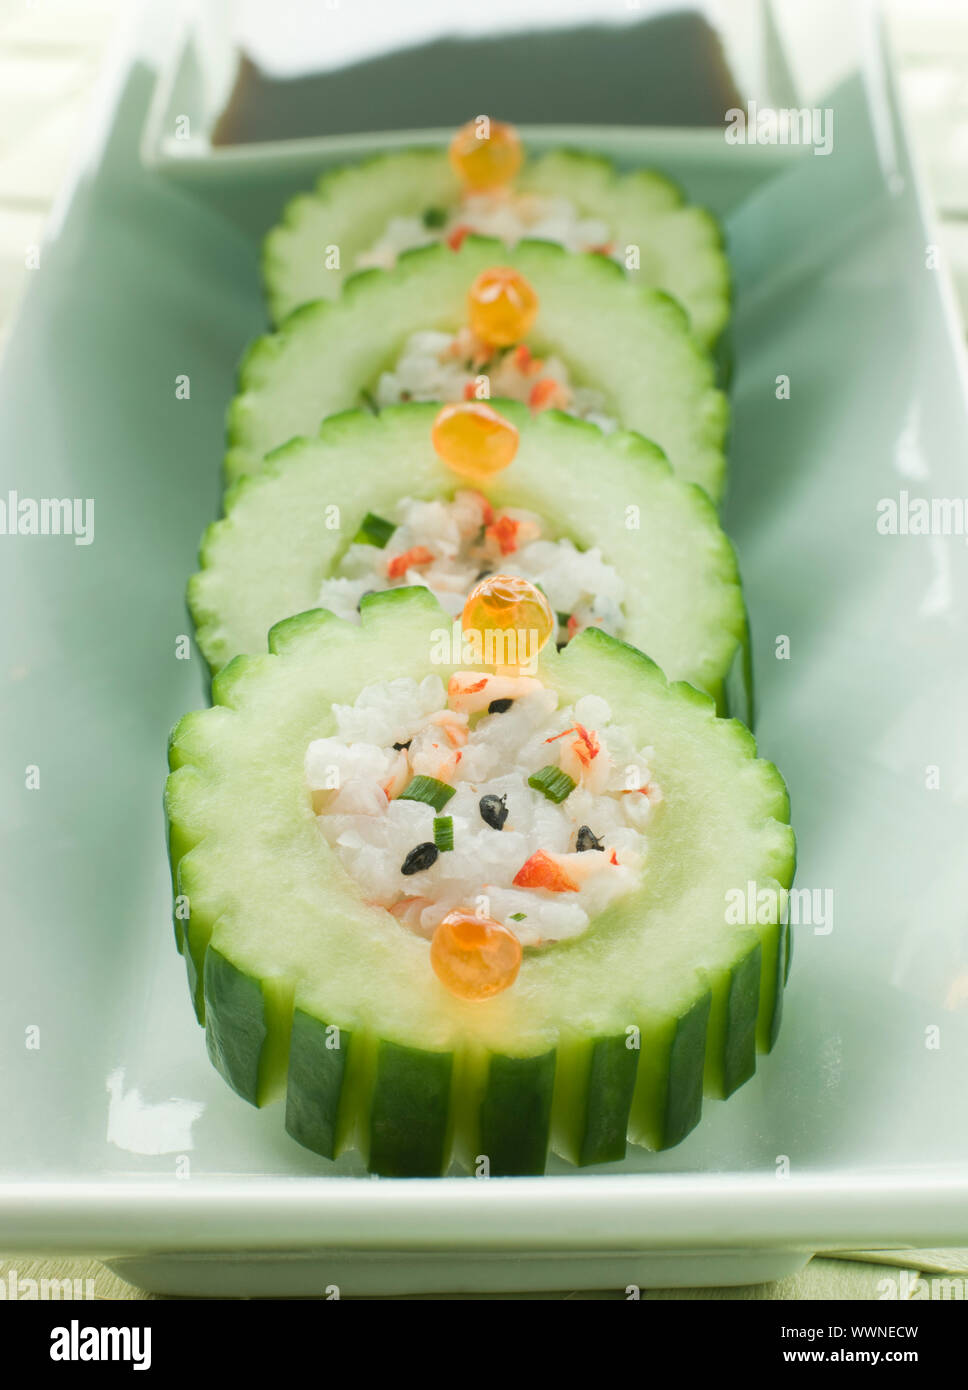 Plate of Cucumber Sushi Roll with Crayfish and a Soy Dip Stock Photo